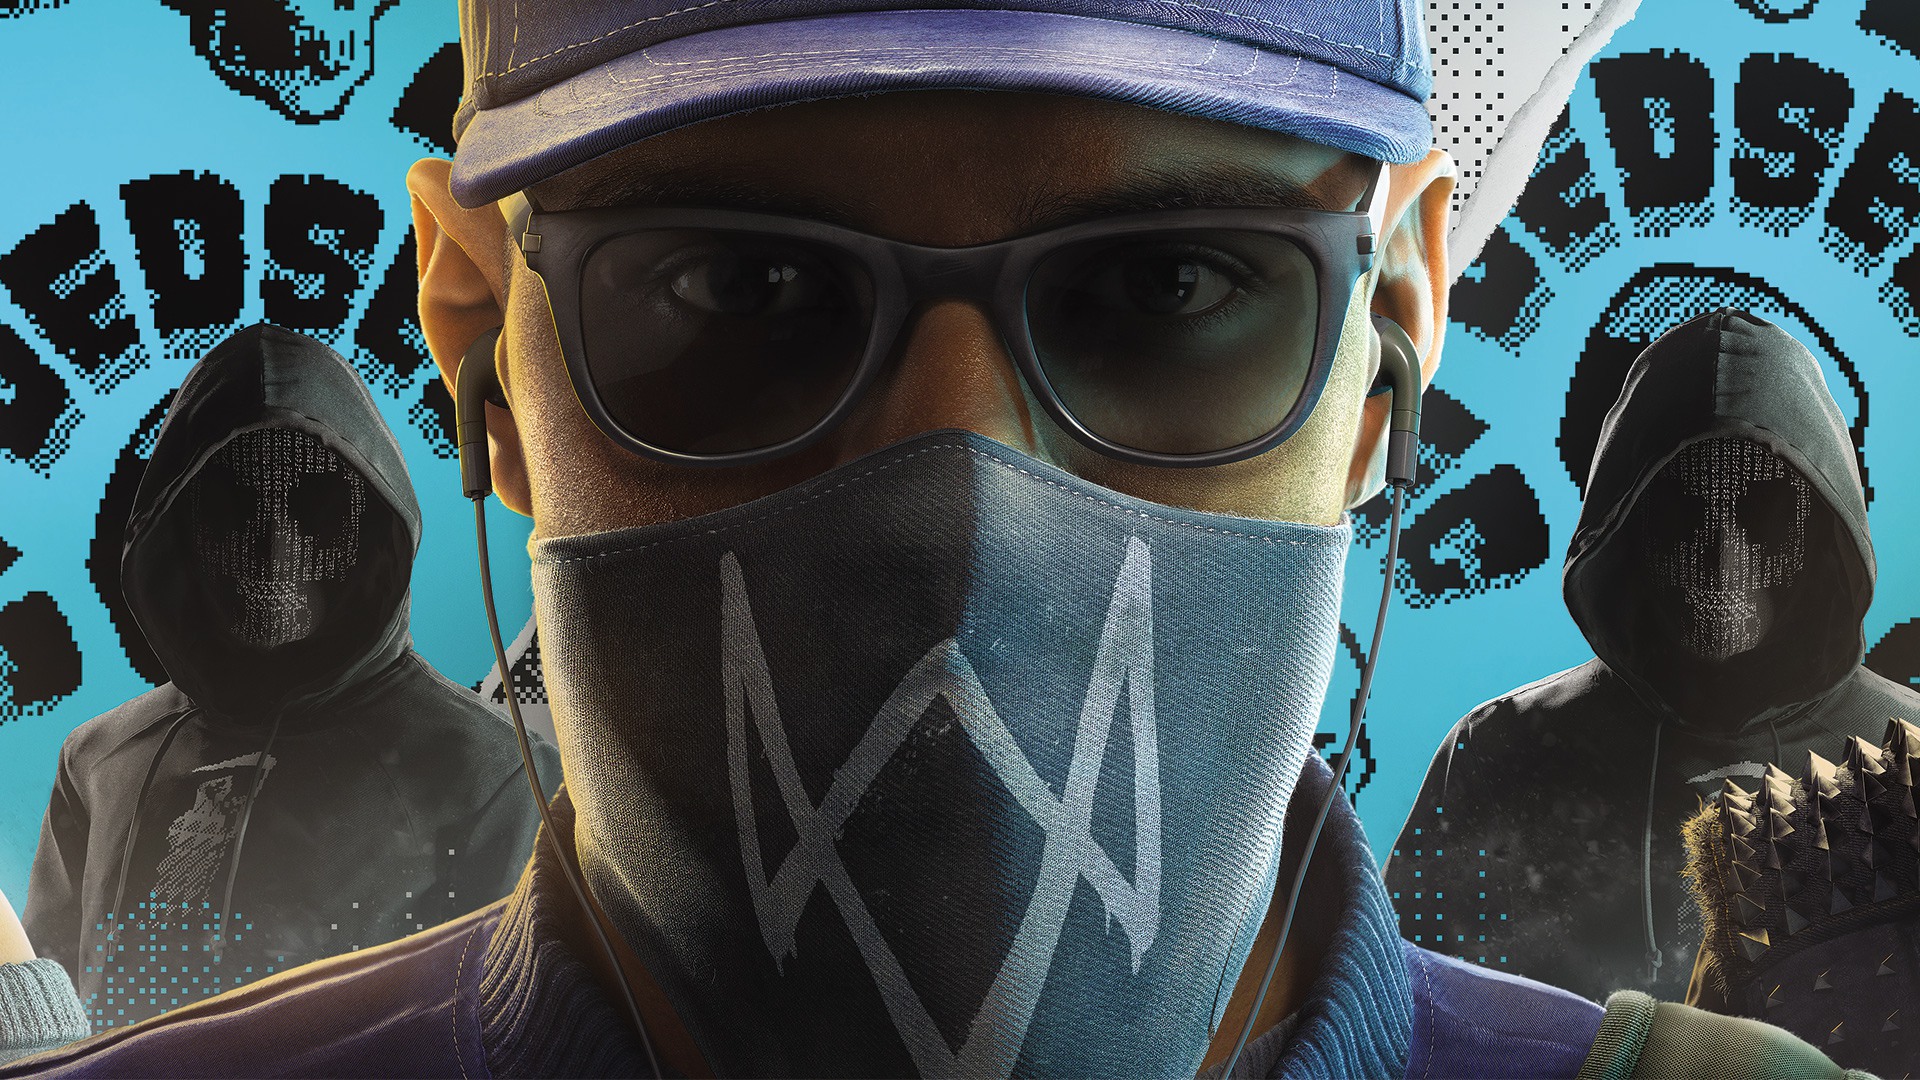 Watch Dogs 2 Marcus Holloway 1920x1080